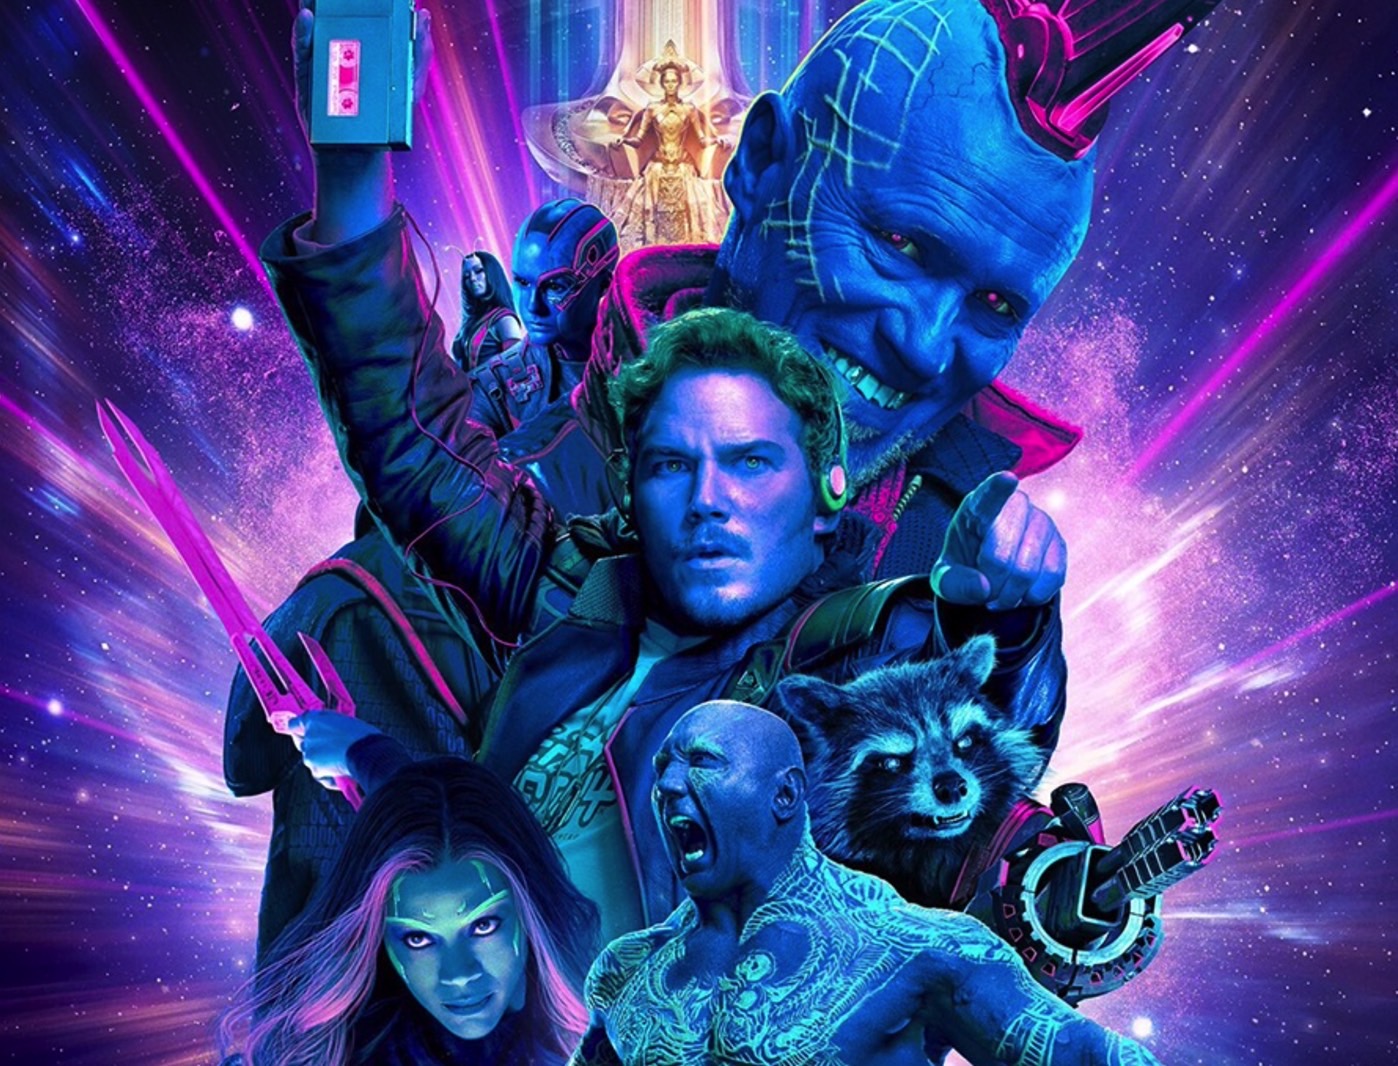 guardians of the galaxy movie poster 2022